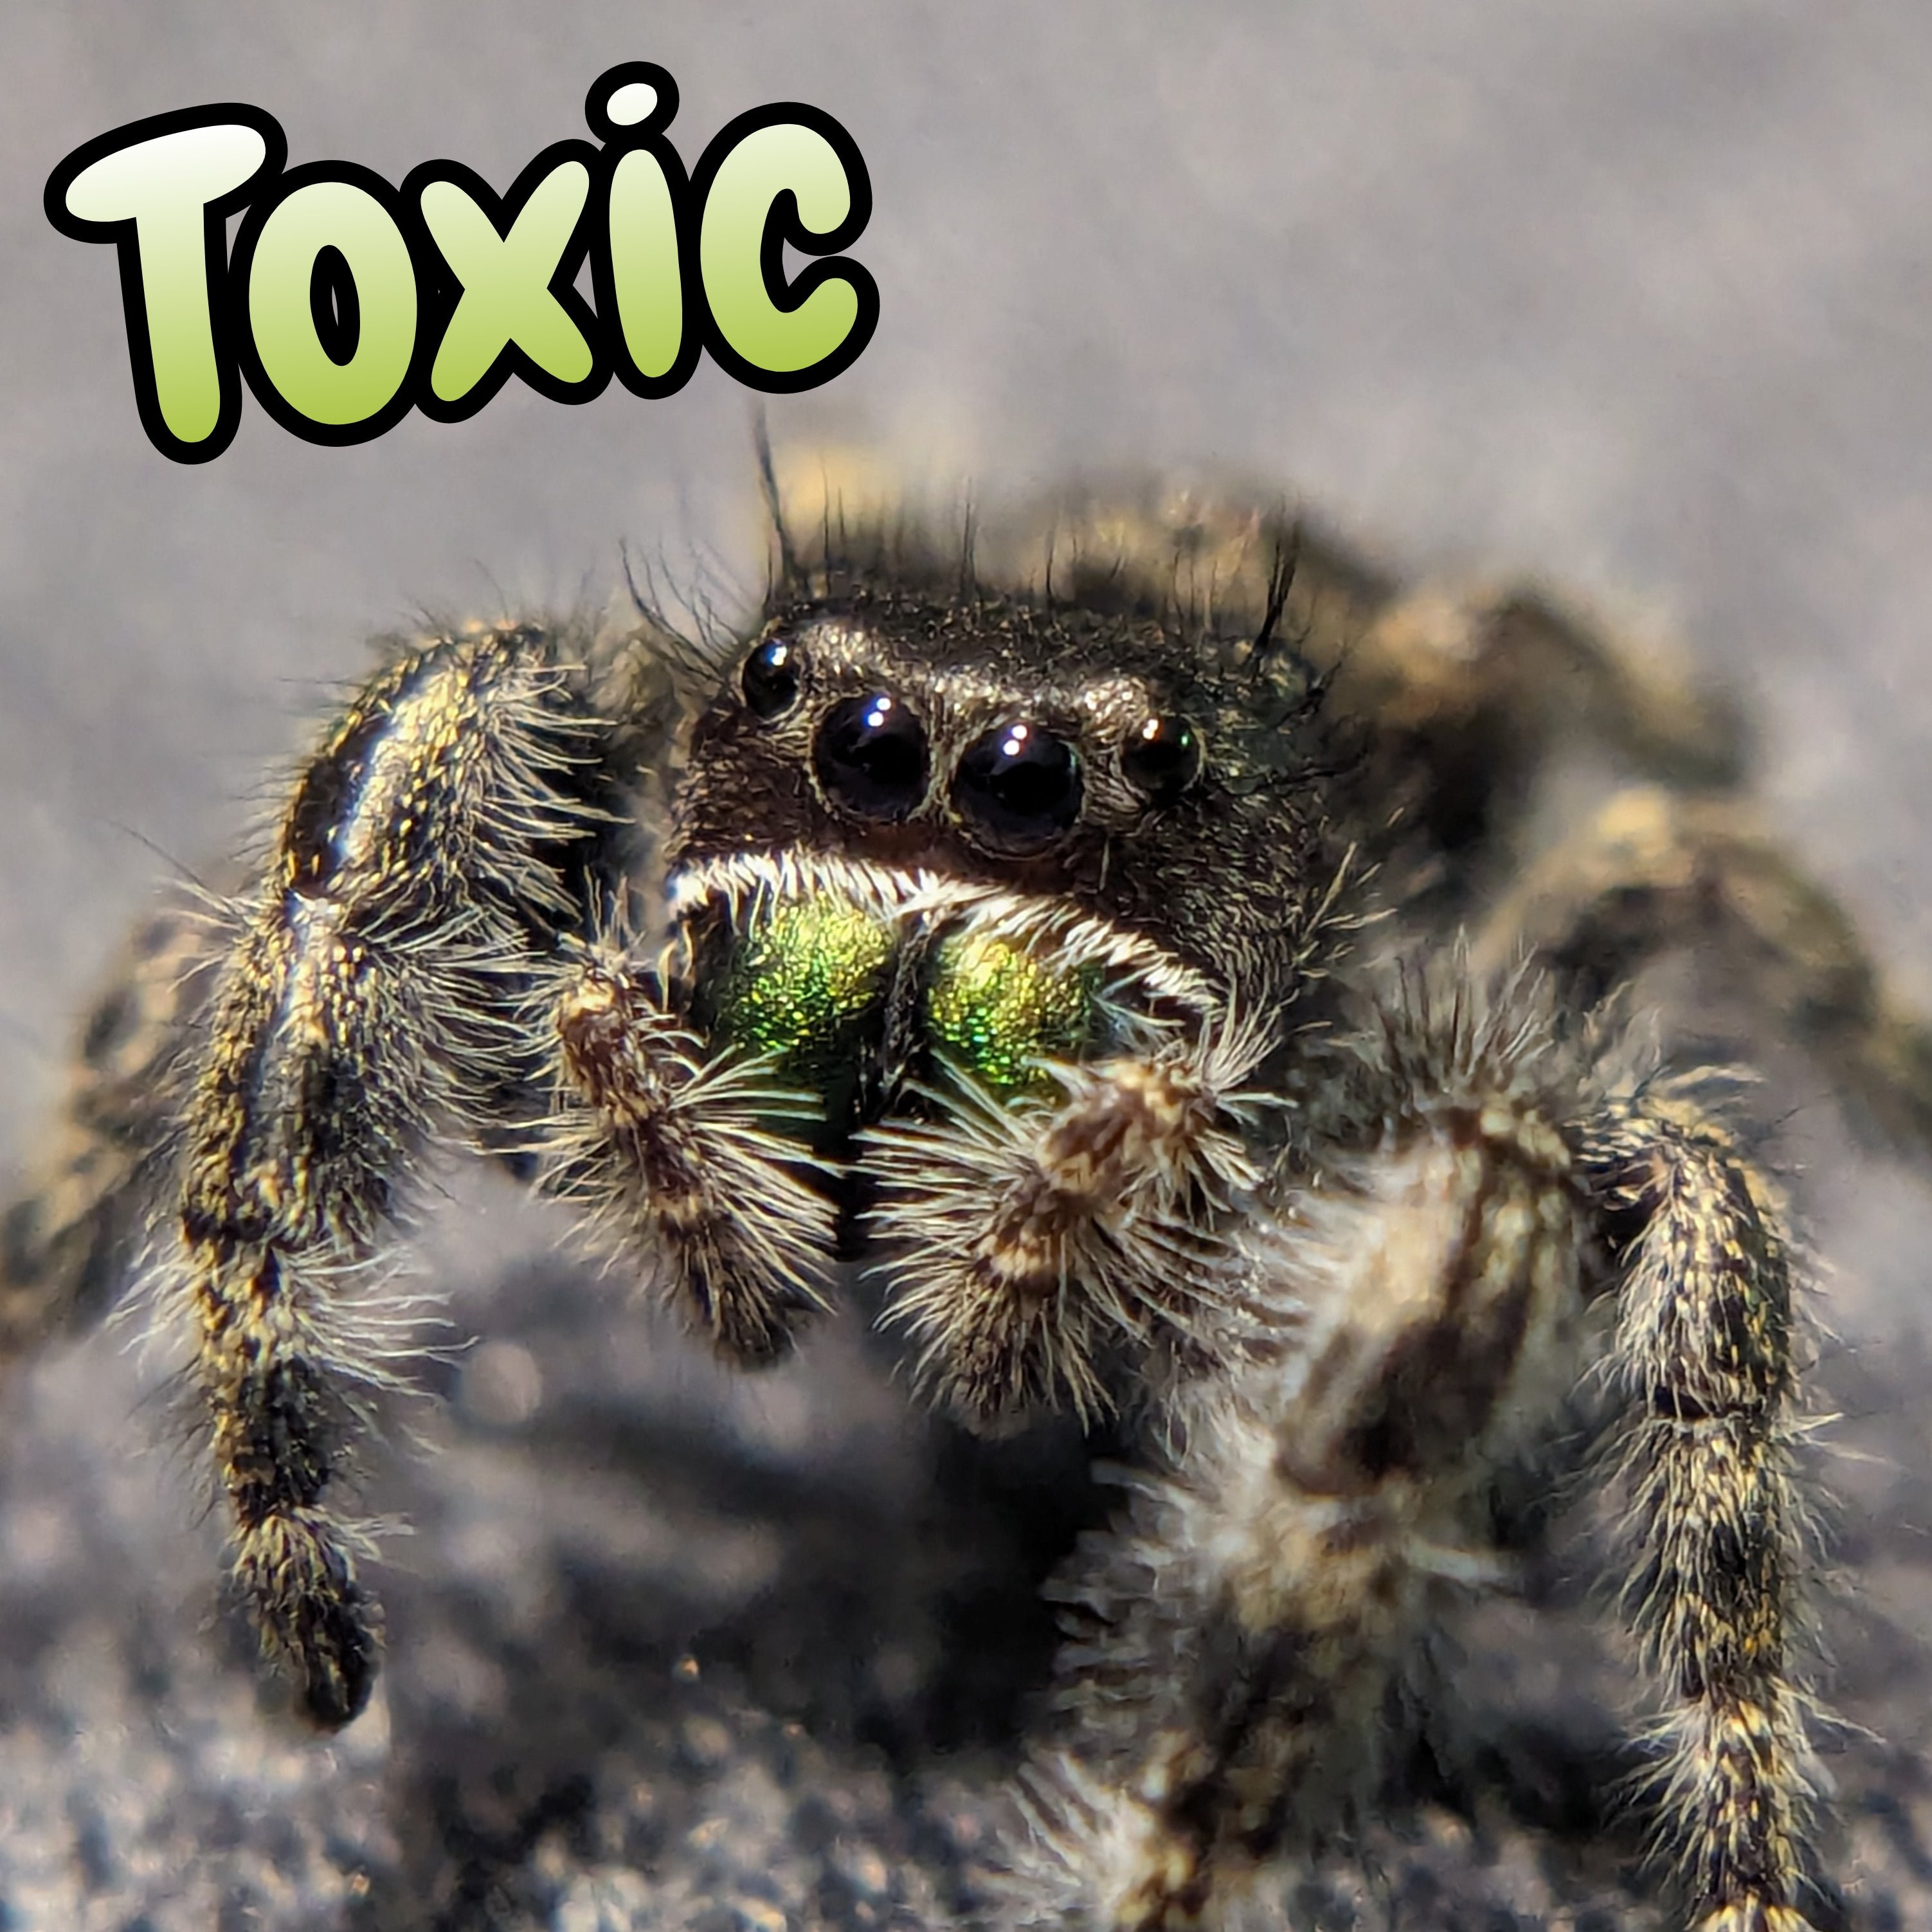 Audax Jumping Spider "Toxic"